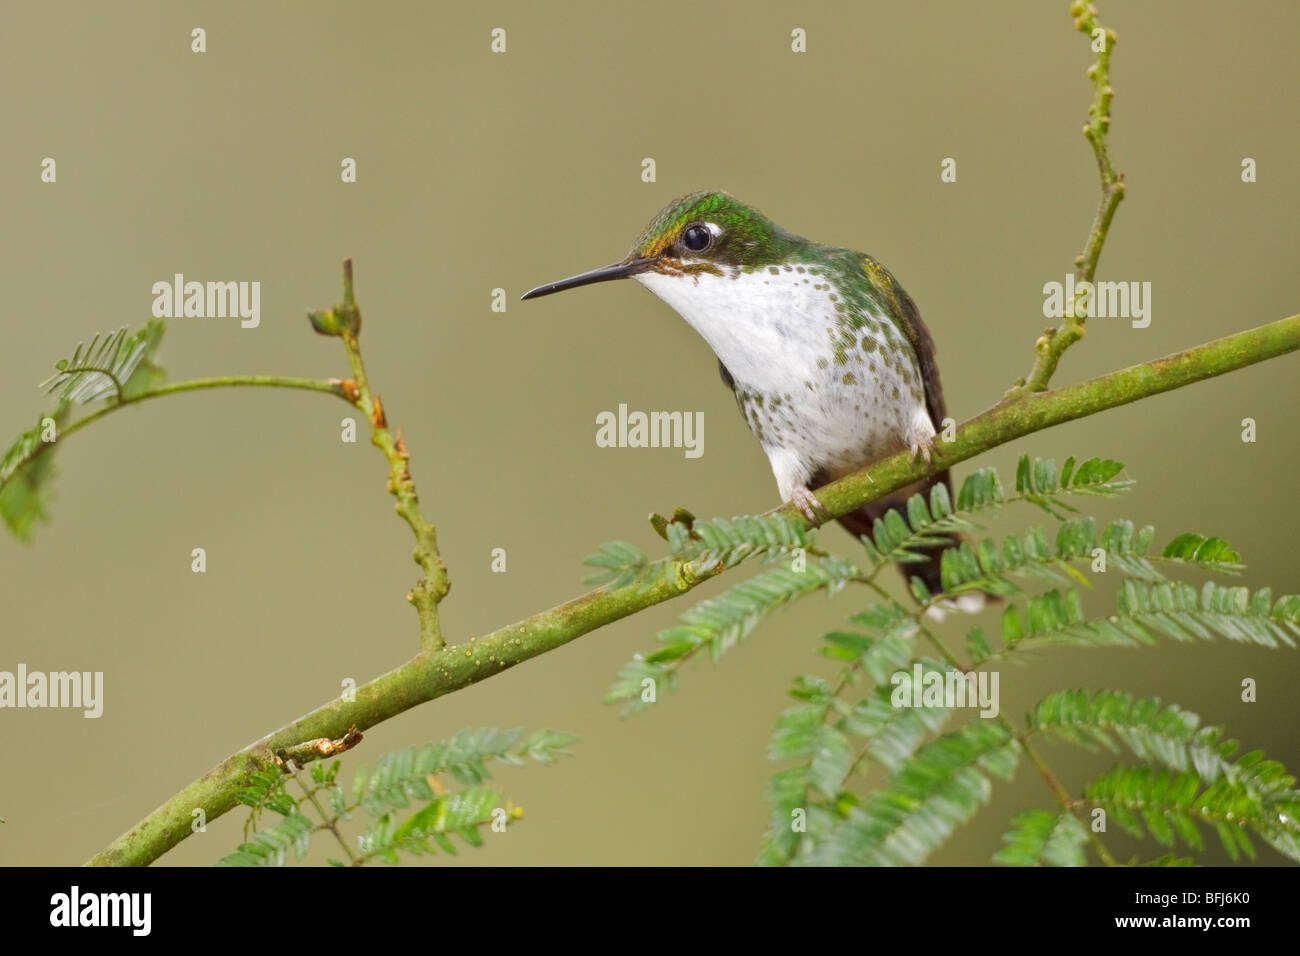 A Booted Racket-tail hummingbird (Ocreatus underwoodii) perched on a branch in the Tandayapa Valley of Ecuador. Stock Photo